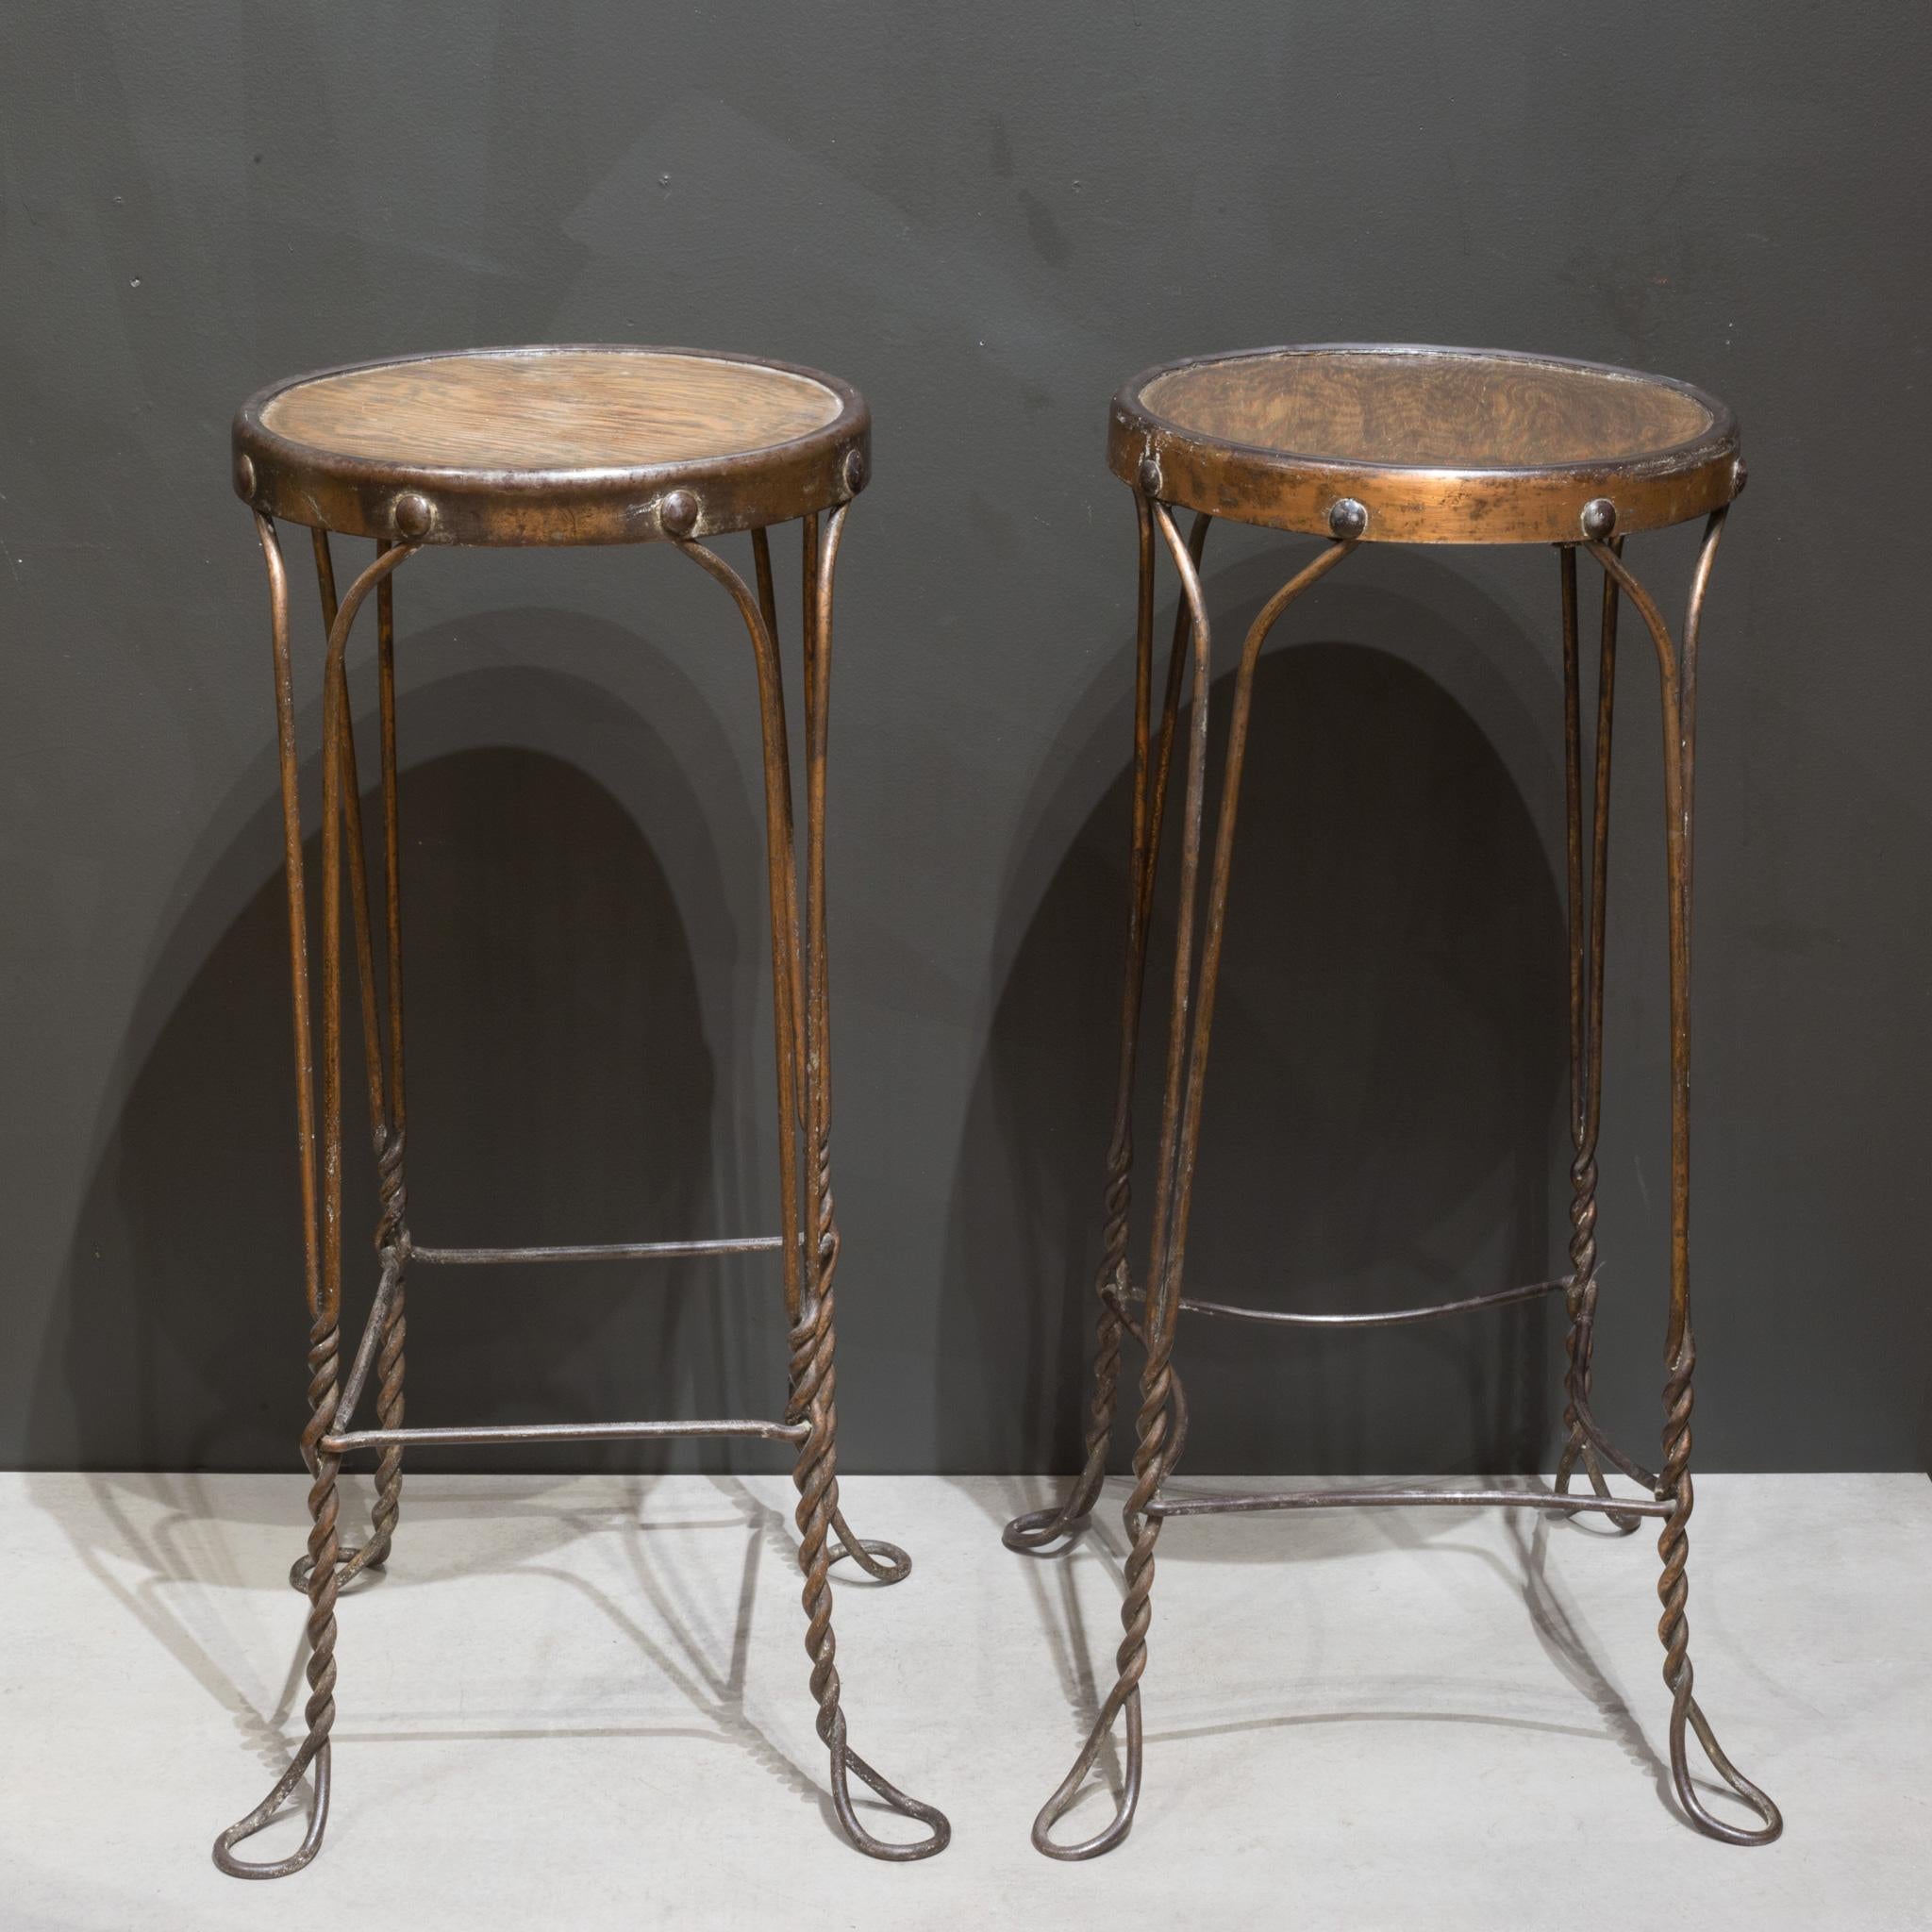 Industrial Late 19th/Early 20th c. Ice Cream Parlor Copper Plated Wire Stools c.1890-1910